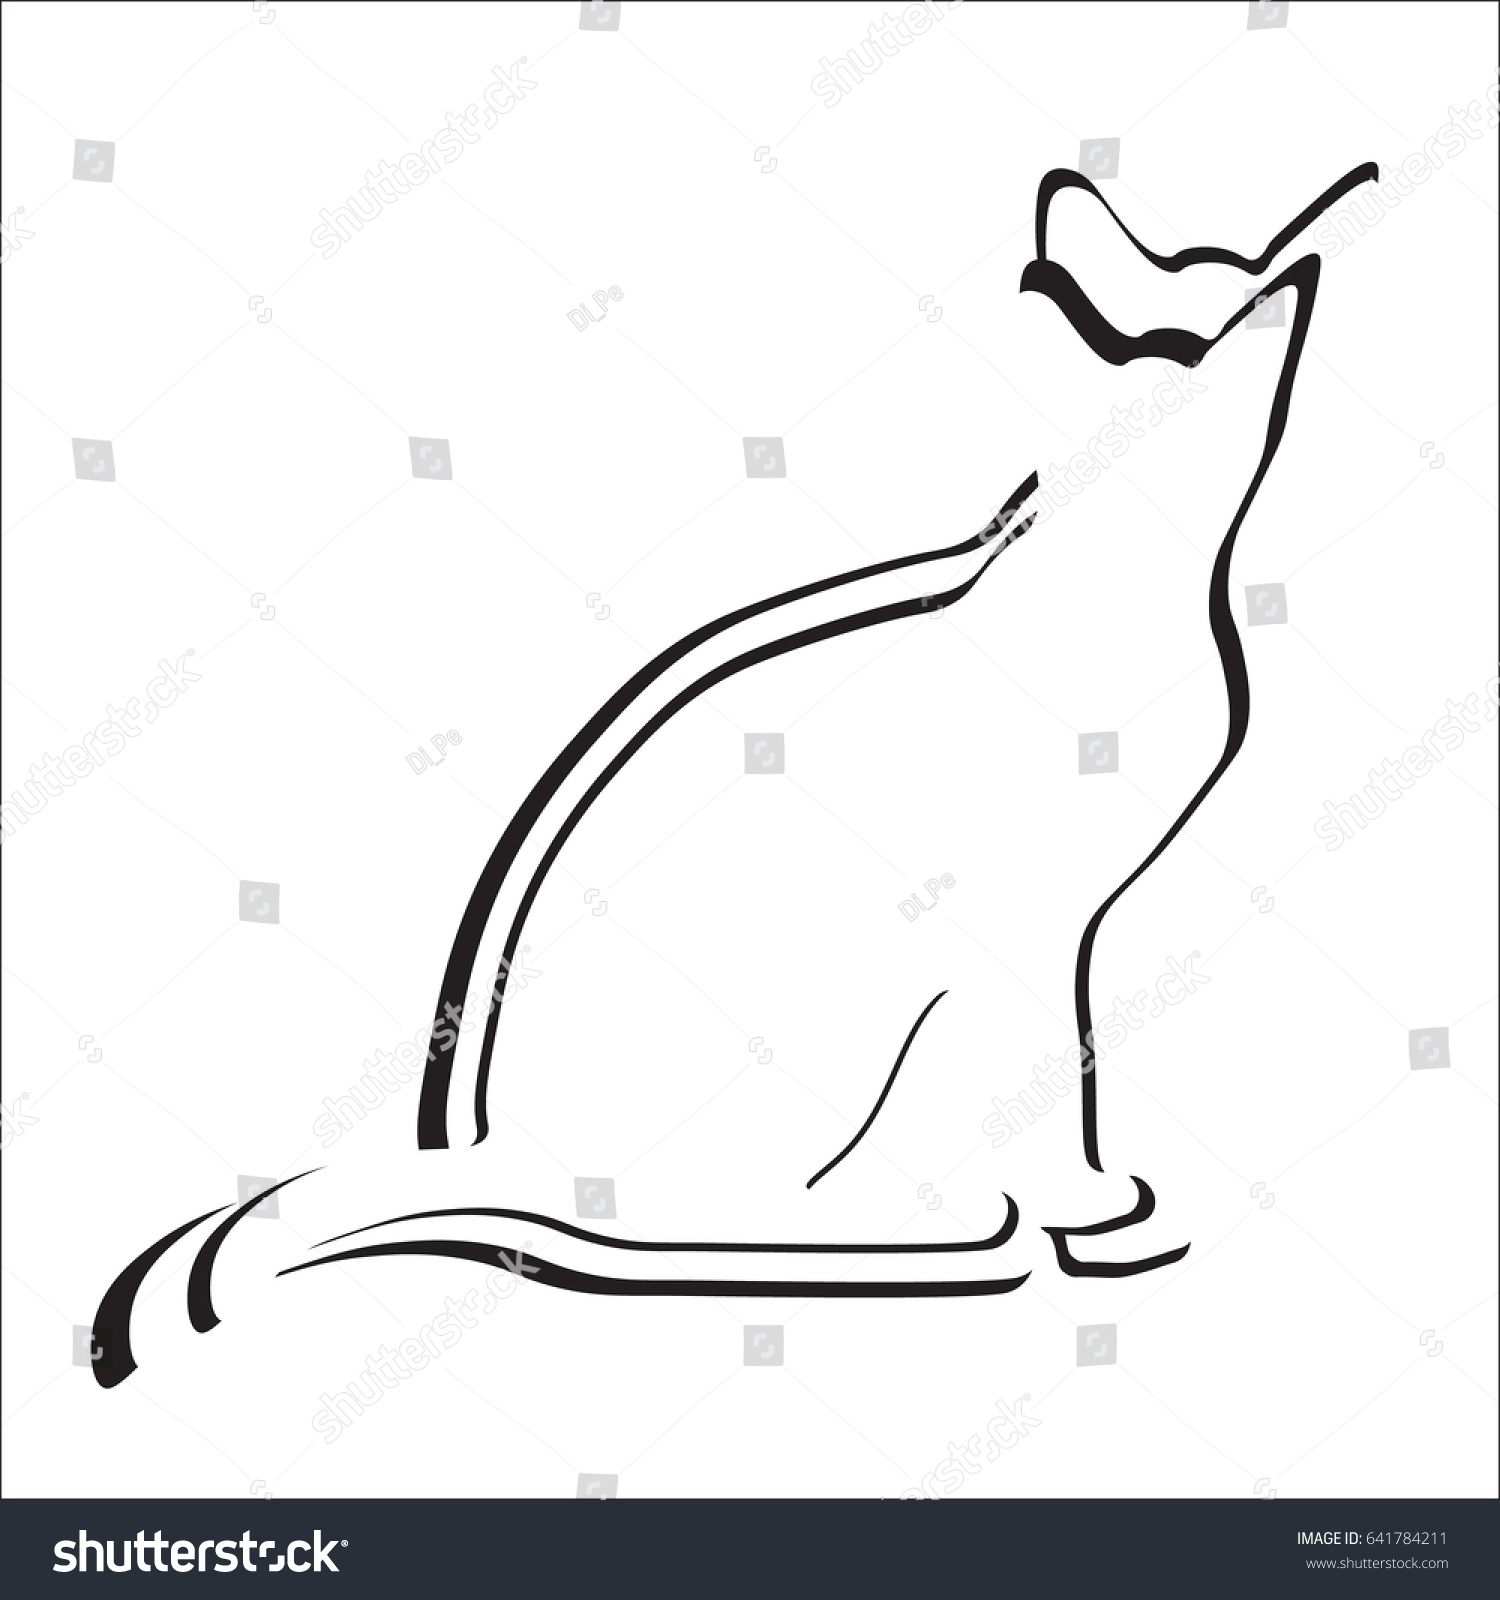 Cat Silhouette Stock Vector Royalty Free 641784211